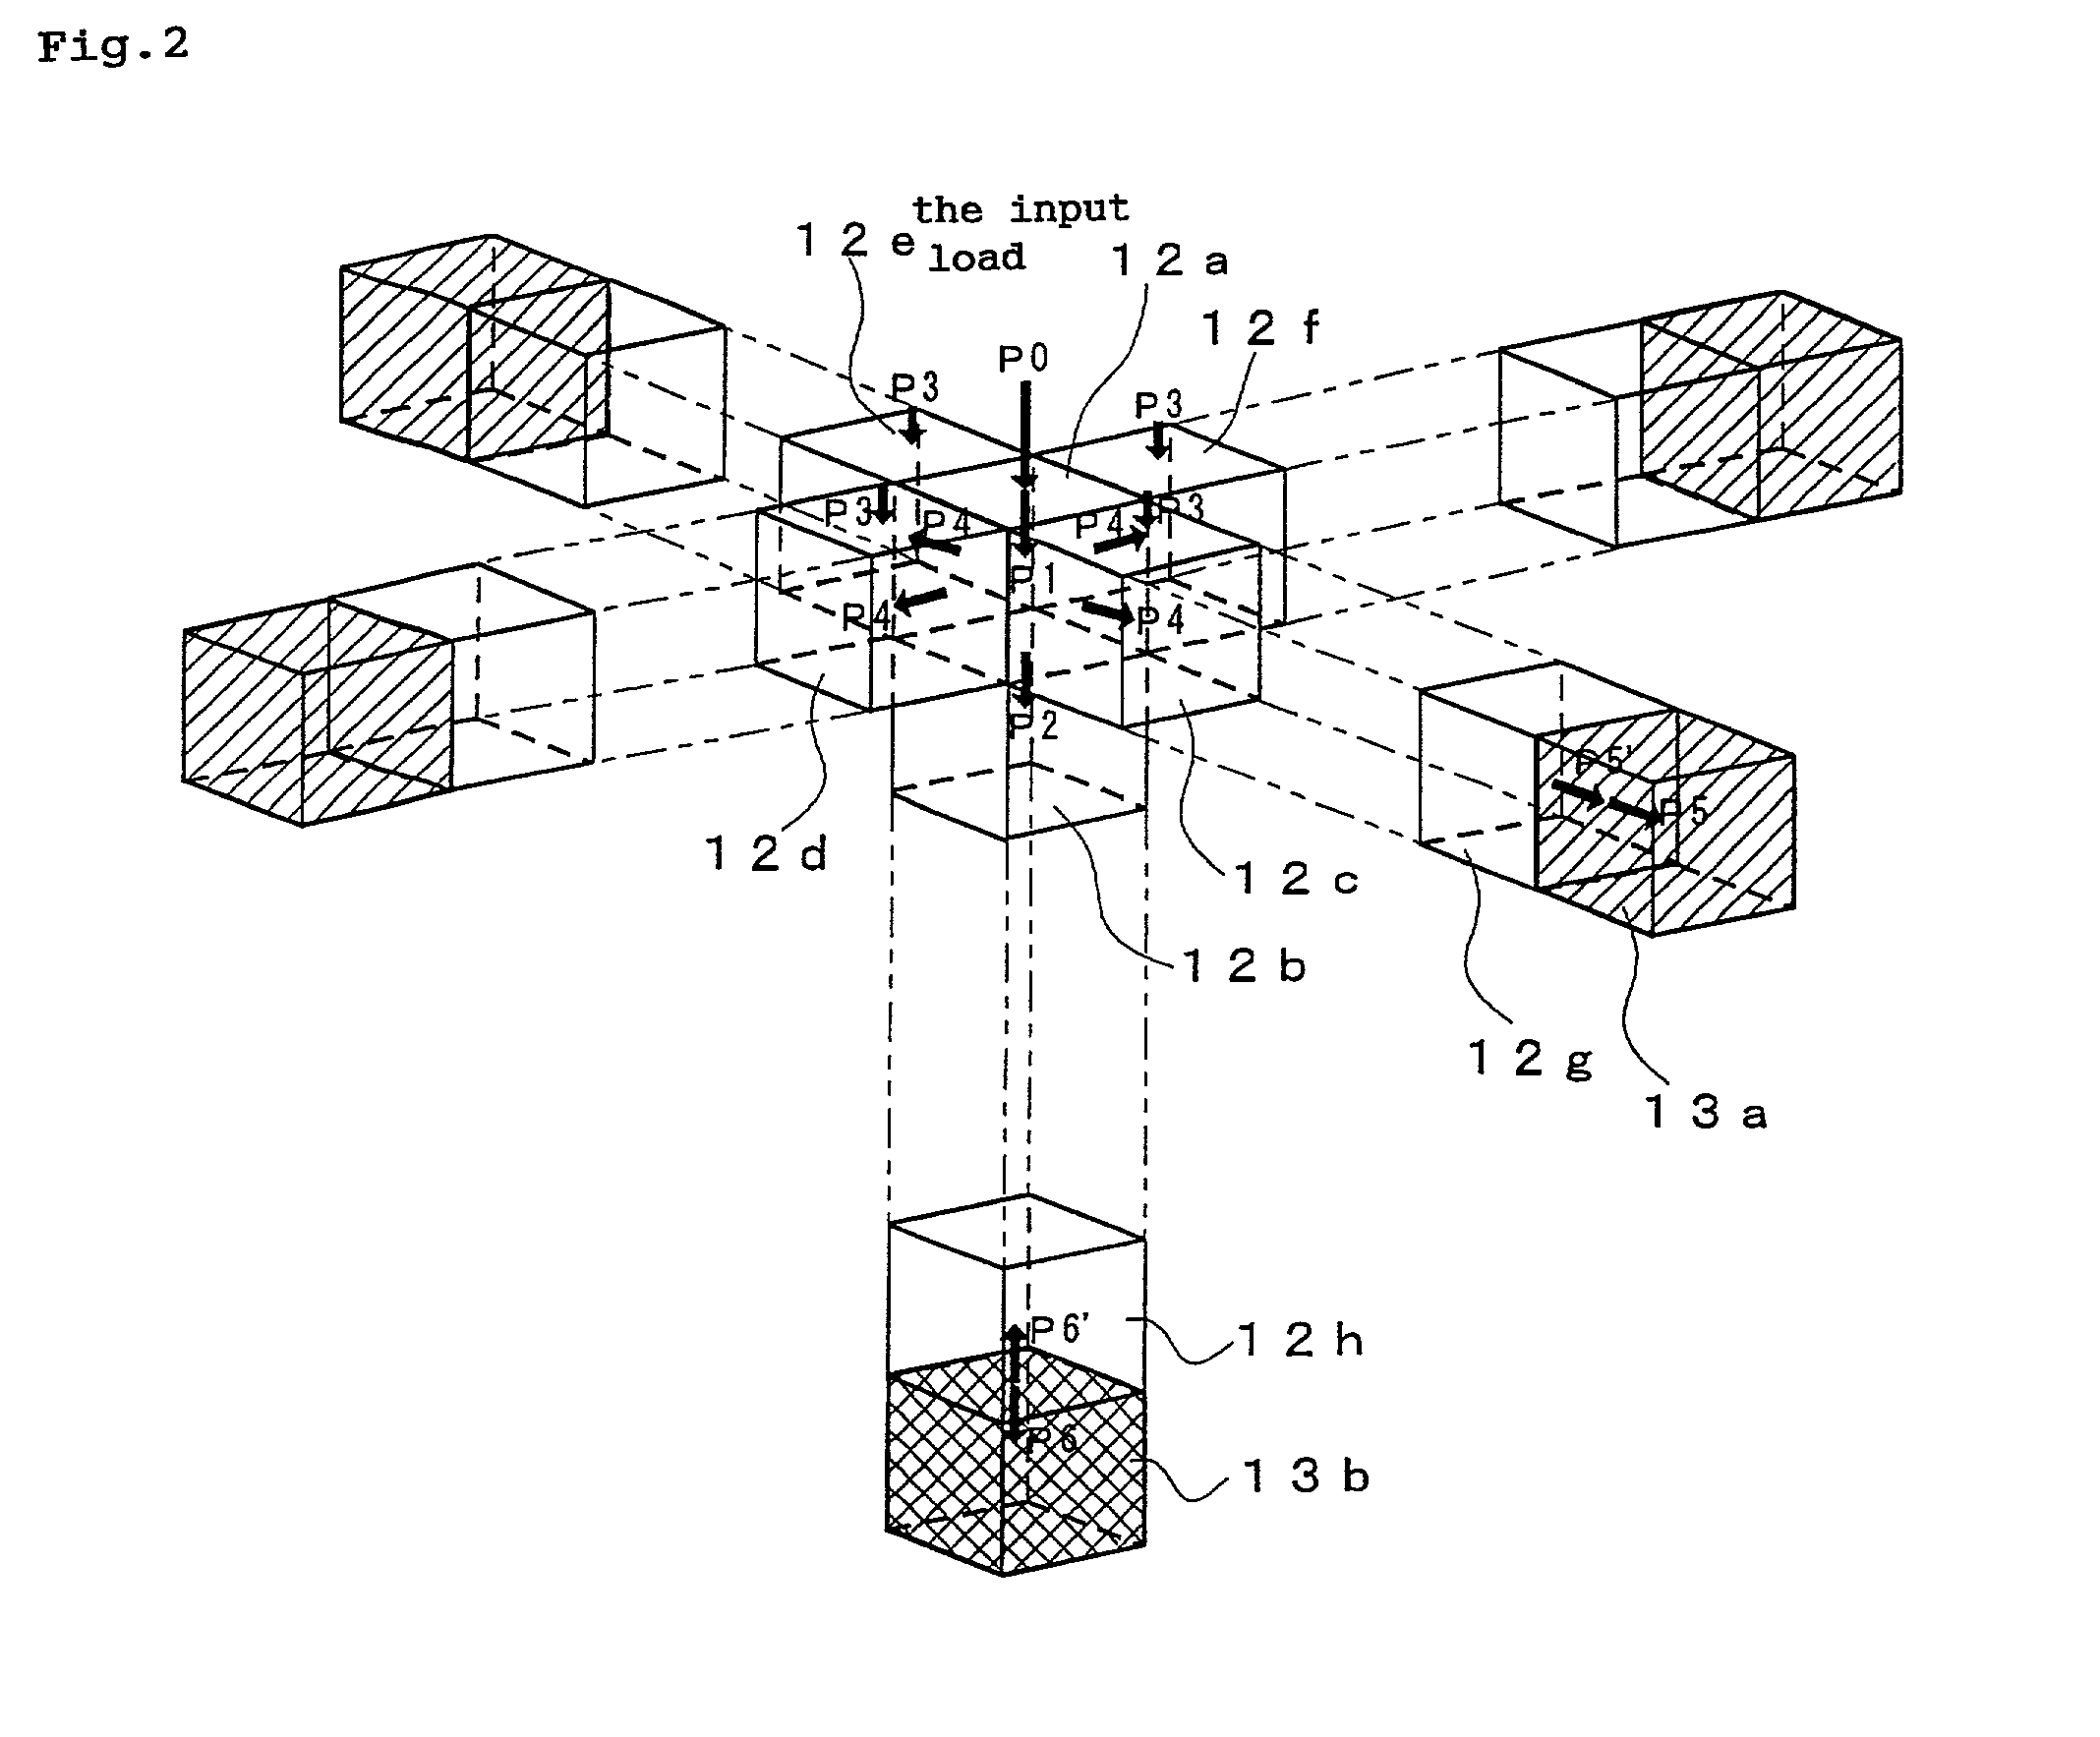 Calculation method for physical body deformation under load propagation